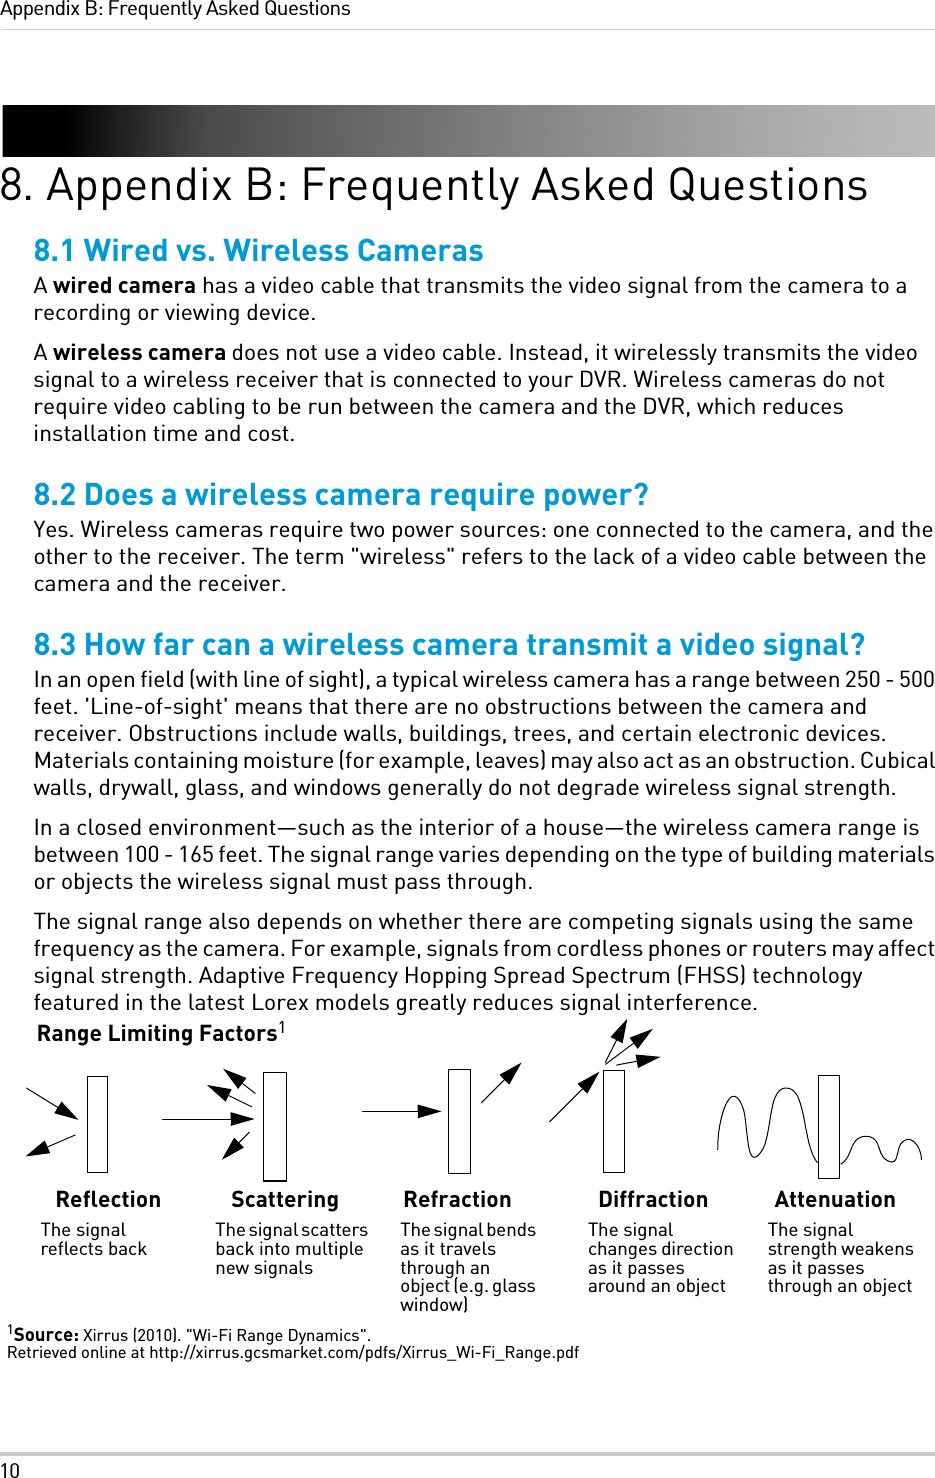 10Appendix B: Frequently Asked Questions8. Appendix B: Frequently Asked Questions8.1 Wired vs. Wireless CamerasA wired camera has a video cable that transmits the video signal from the camera to a recording or viewing device.A wireless camera does not use a video cable. Instead, it wirelessly transmits the video signal to a wireless receiver that is connected to your DVR. Wireless cameras do not require video cabling to be run between the camera and the DVR, which reduces installation time and cost.8.2 Does a wireless camera require power?Yes. Wireless cameras require two power sources: one connected to the camera, and the other to the receiver. The term &quot;wireless&quot; refers to the lack of a video cable between the camera and the receiver.8.3 How far can a wireless camera transmit a video signal?In an open field (with line of sight), a typical wireless camera has a range between 250 - 500 feet. &apos;Line-of-sight&apos; means that there are no obstructions between the camera and receiver. Obstructions include walls, buildings, trees, and certain electronic devices. Materials containing moisture (for example, leaves) may also act as an obstruction. Cubical walls, drywall, glass, and windows generally do not degrade wireless signal strength. In a closed environment—such as the interior of a house—the wireless camera range is between 100 - 165 feet. The signal range varies depending on the type of building materials or objects the wireless signal must pass through. The signal range also depends on whether there are competing signals using the same frequency as the camera. For example, signals from cordless phones or routers may affect signal strength. Adaptive Frequency Hopping Spread Spectrum (FHSS) technology featured in the latest Lorex models greatly reduces signal interference.Range Limiting Factors1ReflectionThe signal reflects backScatteringThe signal scatters back into multiple new signalsRefractionThe signal bends as it travels through an object (e.g. glass window)DiffractionThe signal changes direction as it passes around an objectAttenuationThe signal strength weakens as it passes through an object1Source: Xirrus (2010). &quot;Wi-Fi Range Dynamics&quot;. Retrieved online at http://xirrus.gcsmarket.com/pdfs/Xirrus_Wi-Fi_Range.pdf